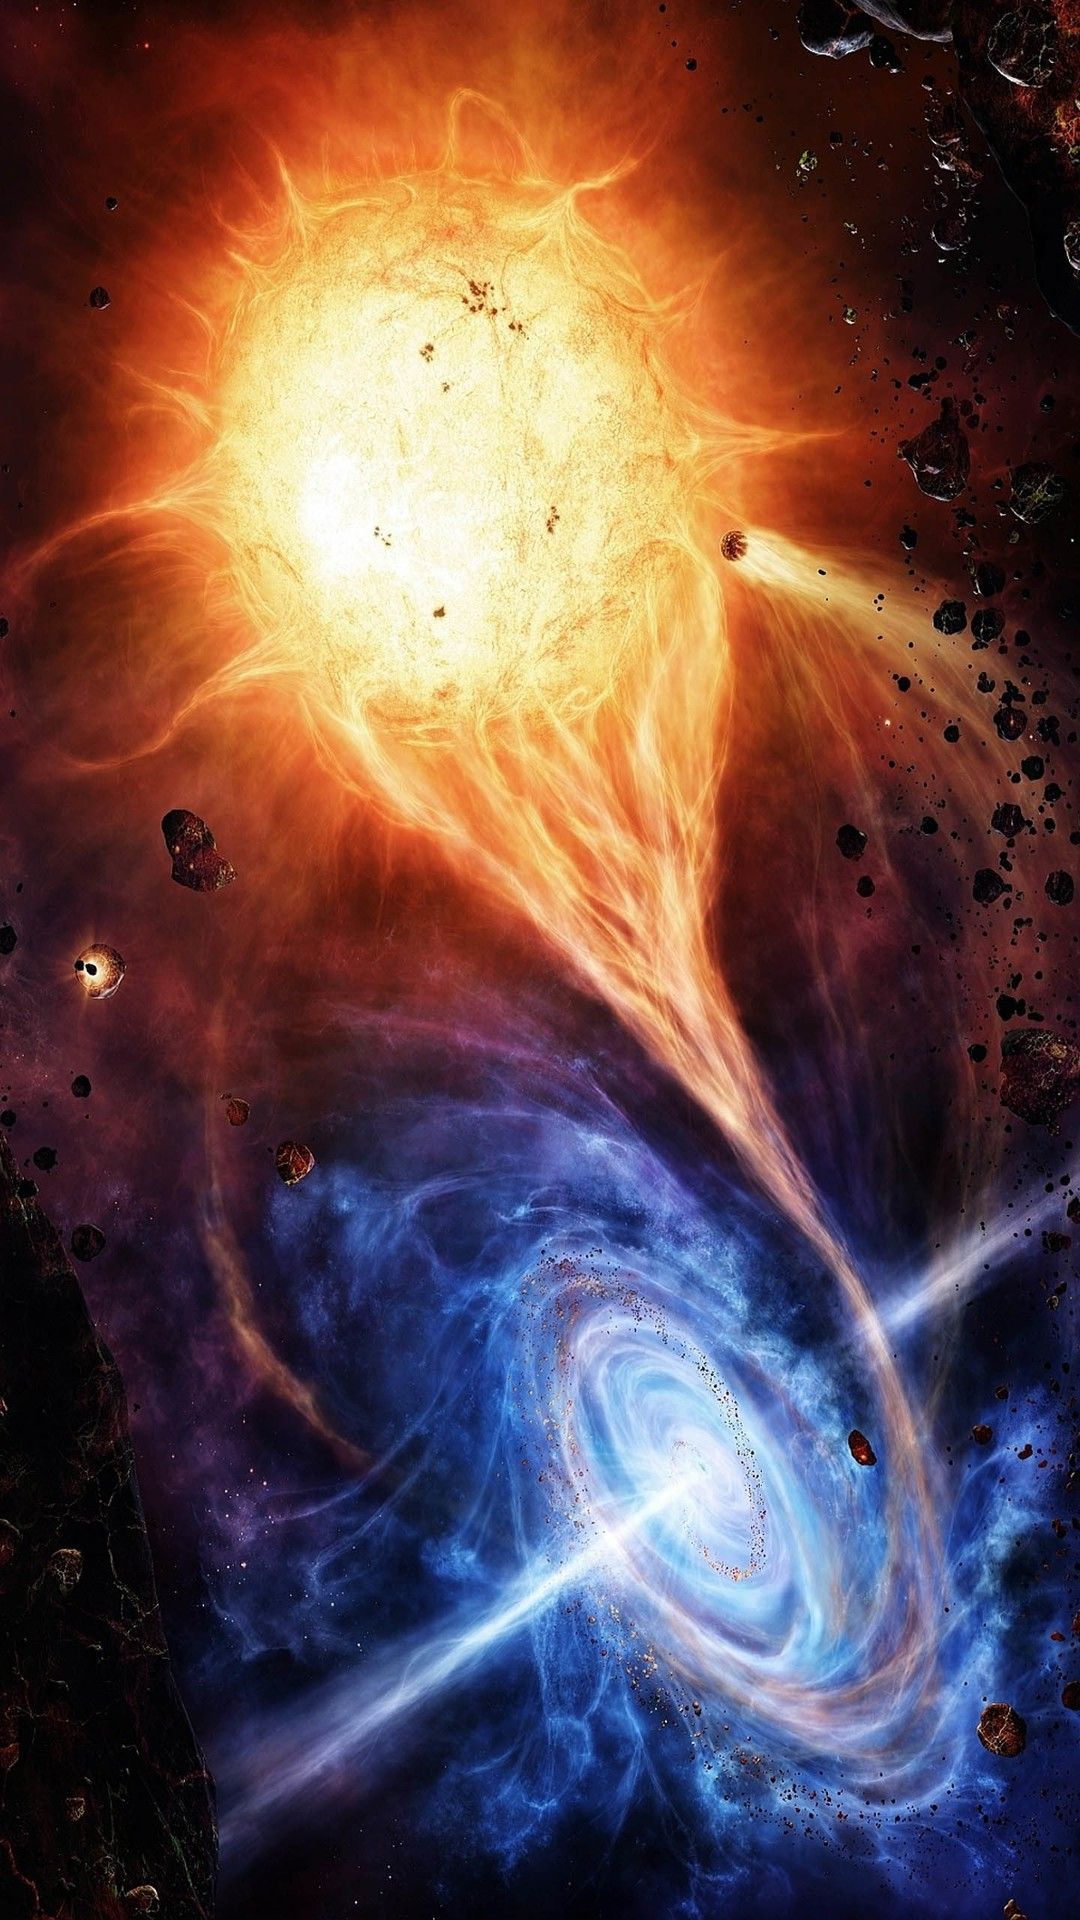 1080x1920 Vortex Red And Blue Space Explosion #iPhone #6 #plus #wallpaper | Space art, Space and astronomy, Black hole